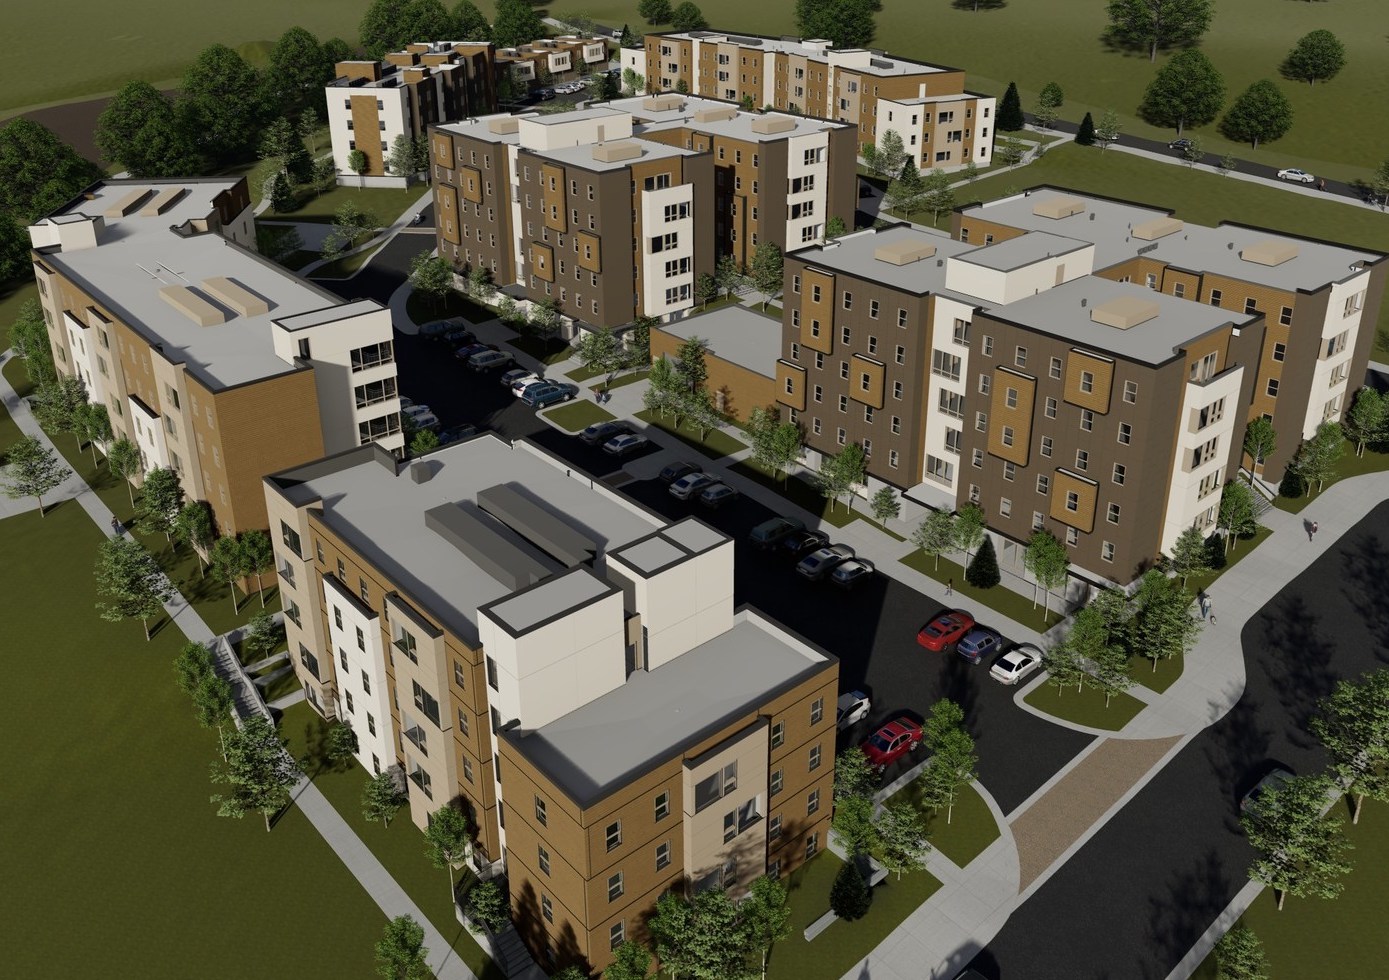 Canyons Village Employee Housing to Offer Over 1,100 Residents Year-Round Flexible Housing Options in Park City, Utah